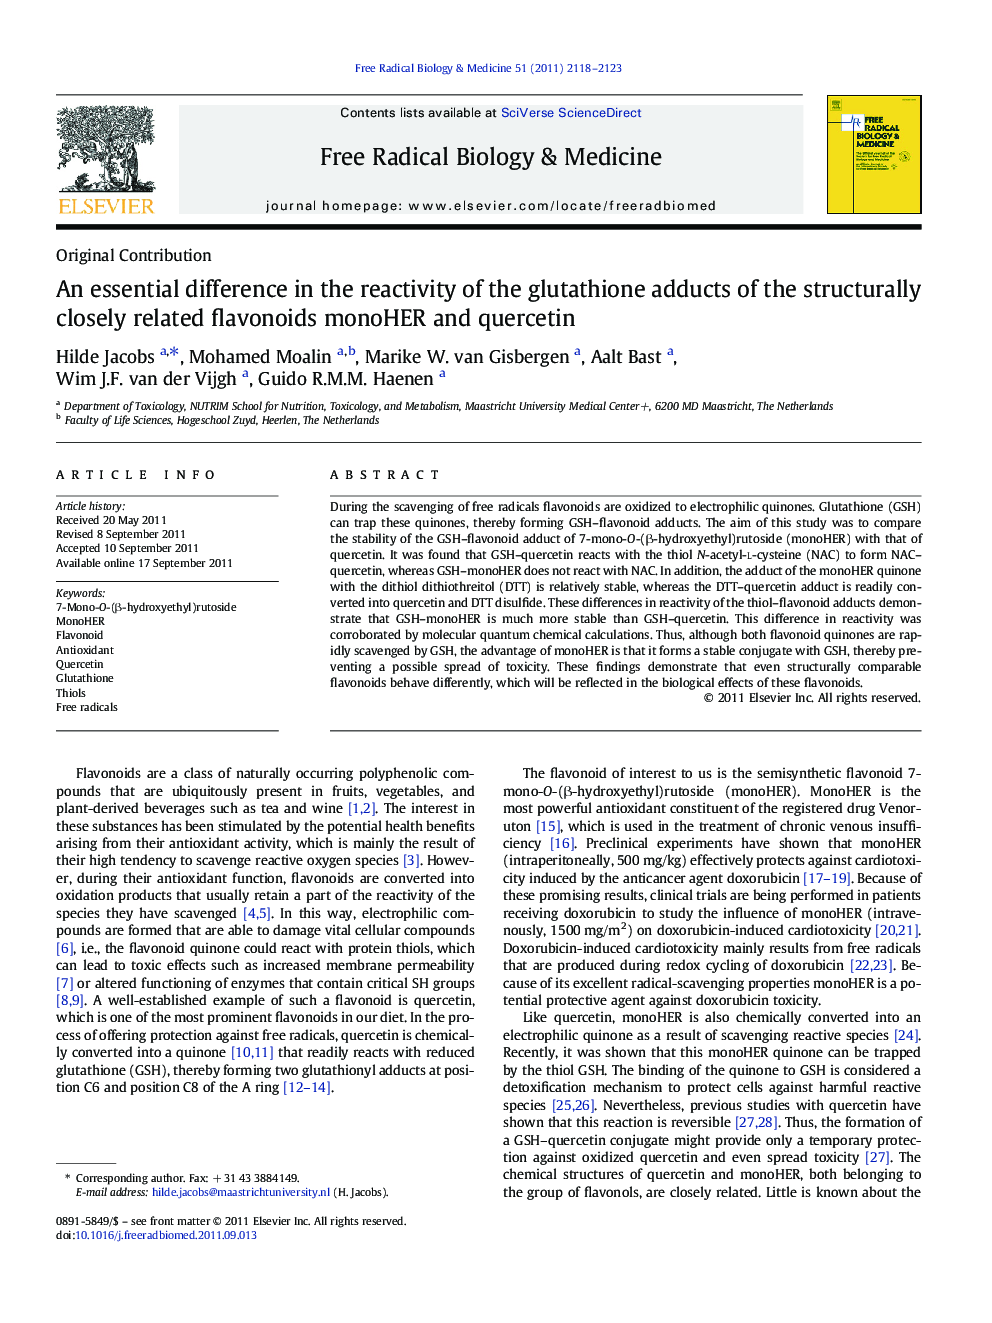 An essential difference in the reactivity of the glutathione adducts of the structurally closely related flavonoids monoHER and quercetin